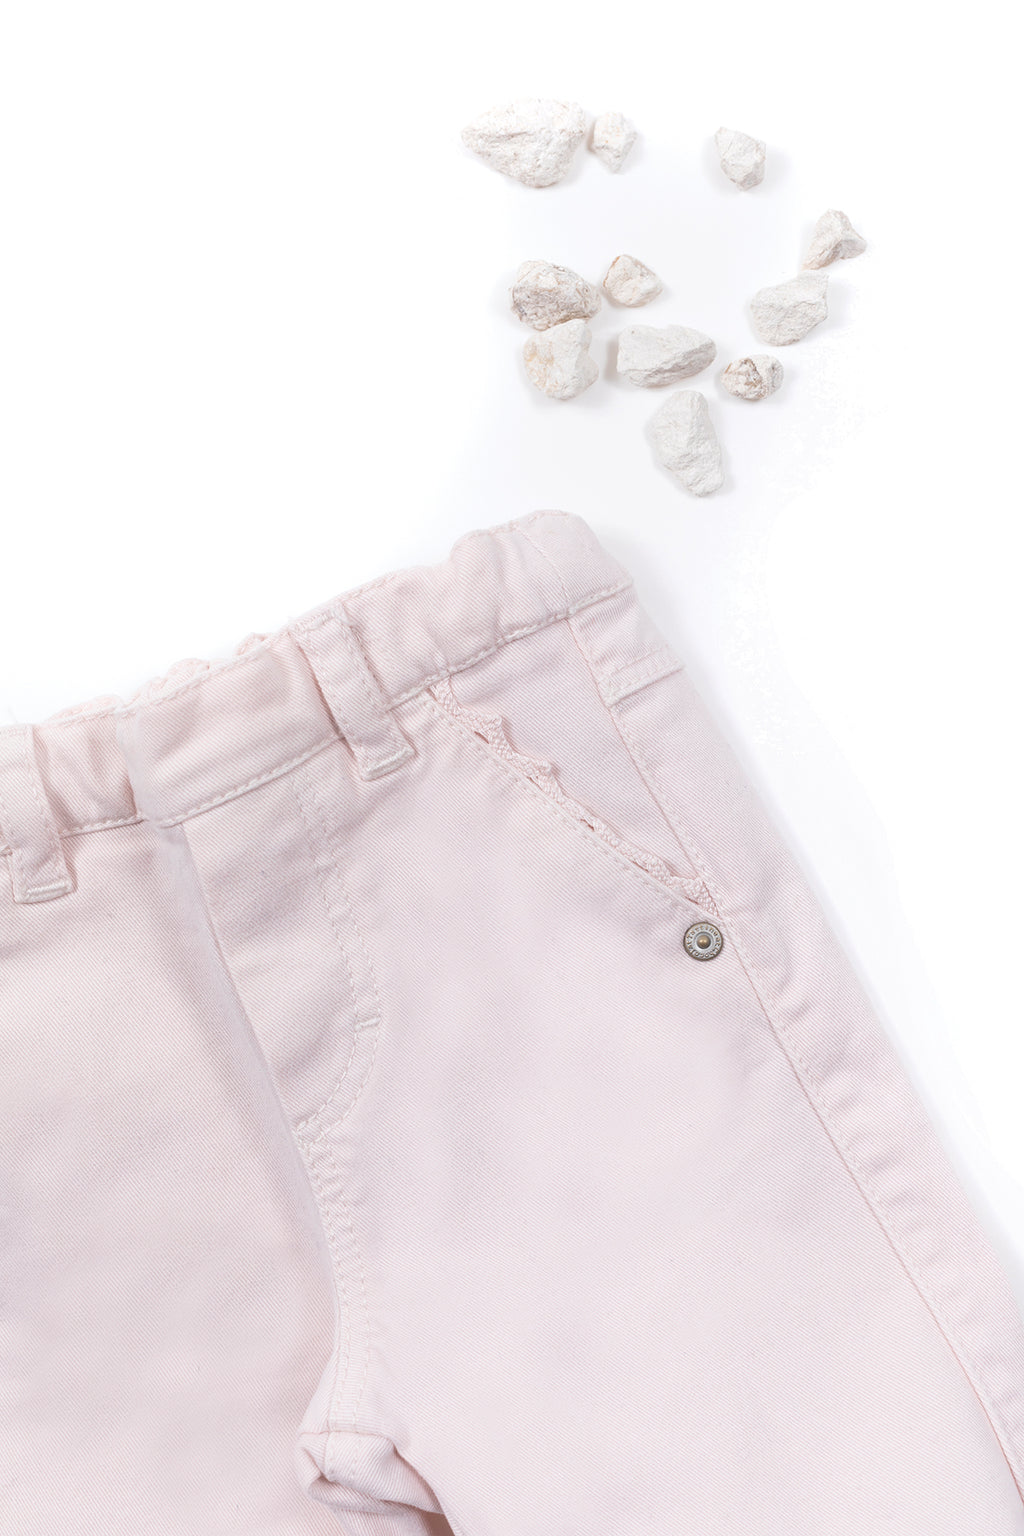 Jeans - Pink Embrodery Tc